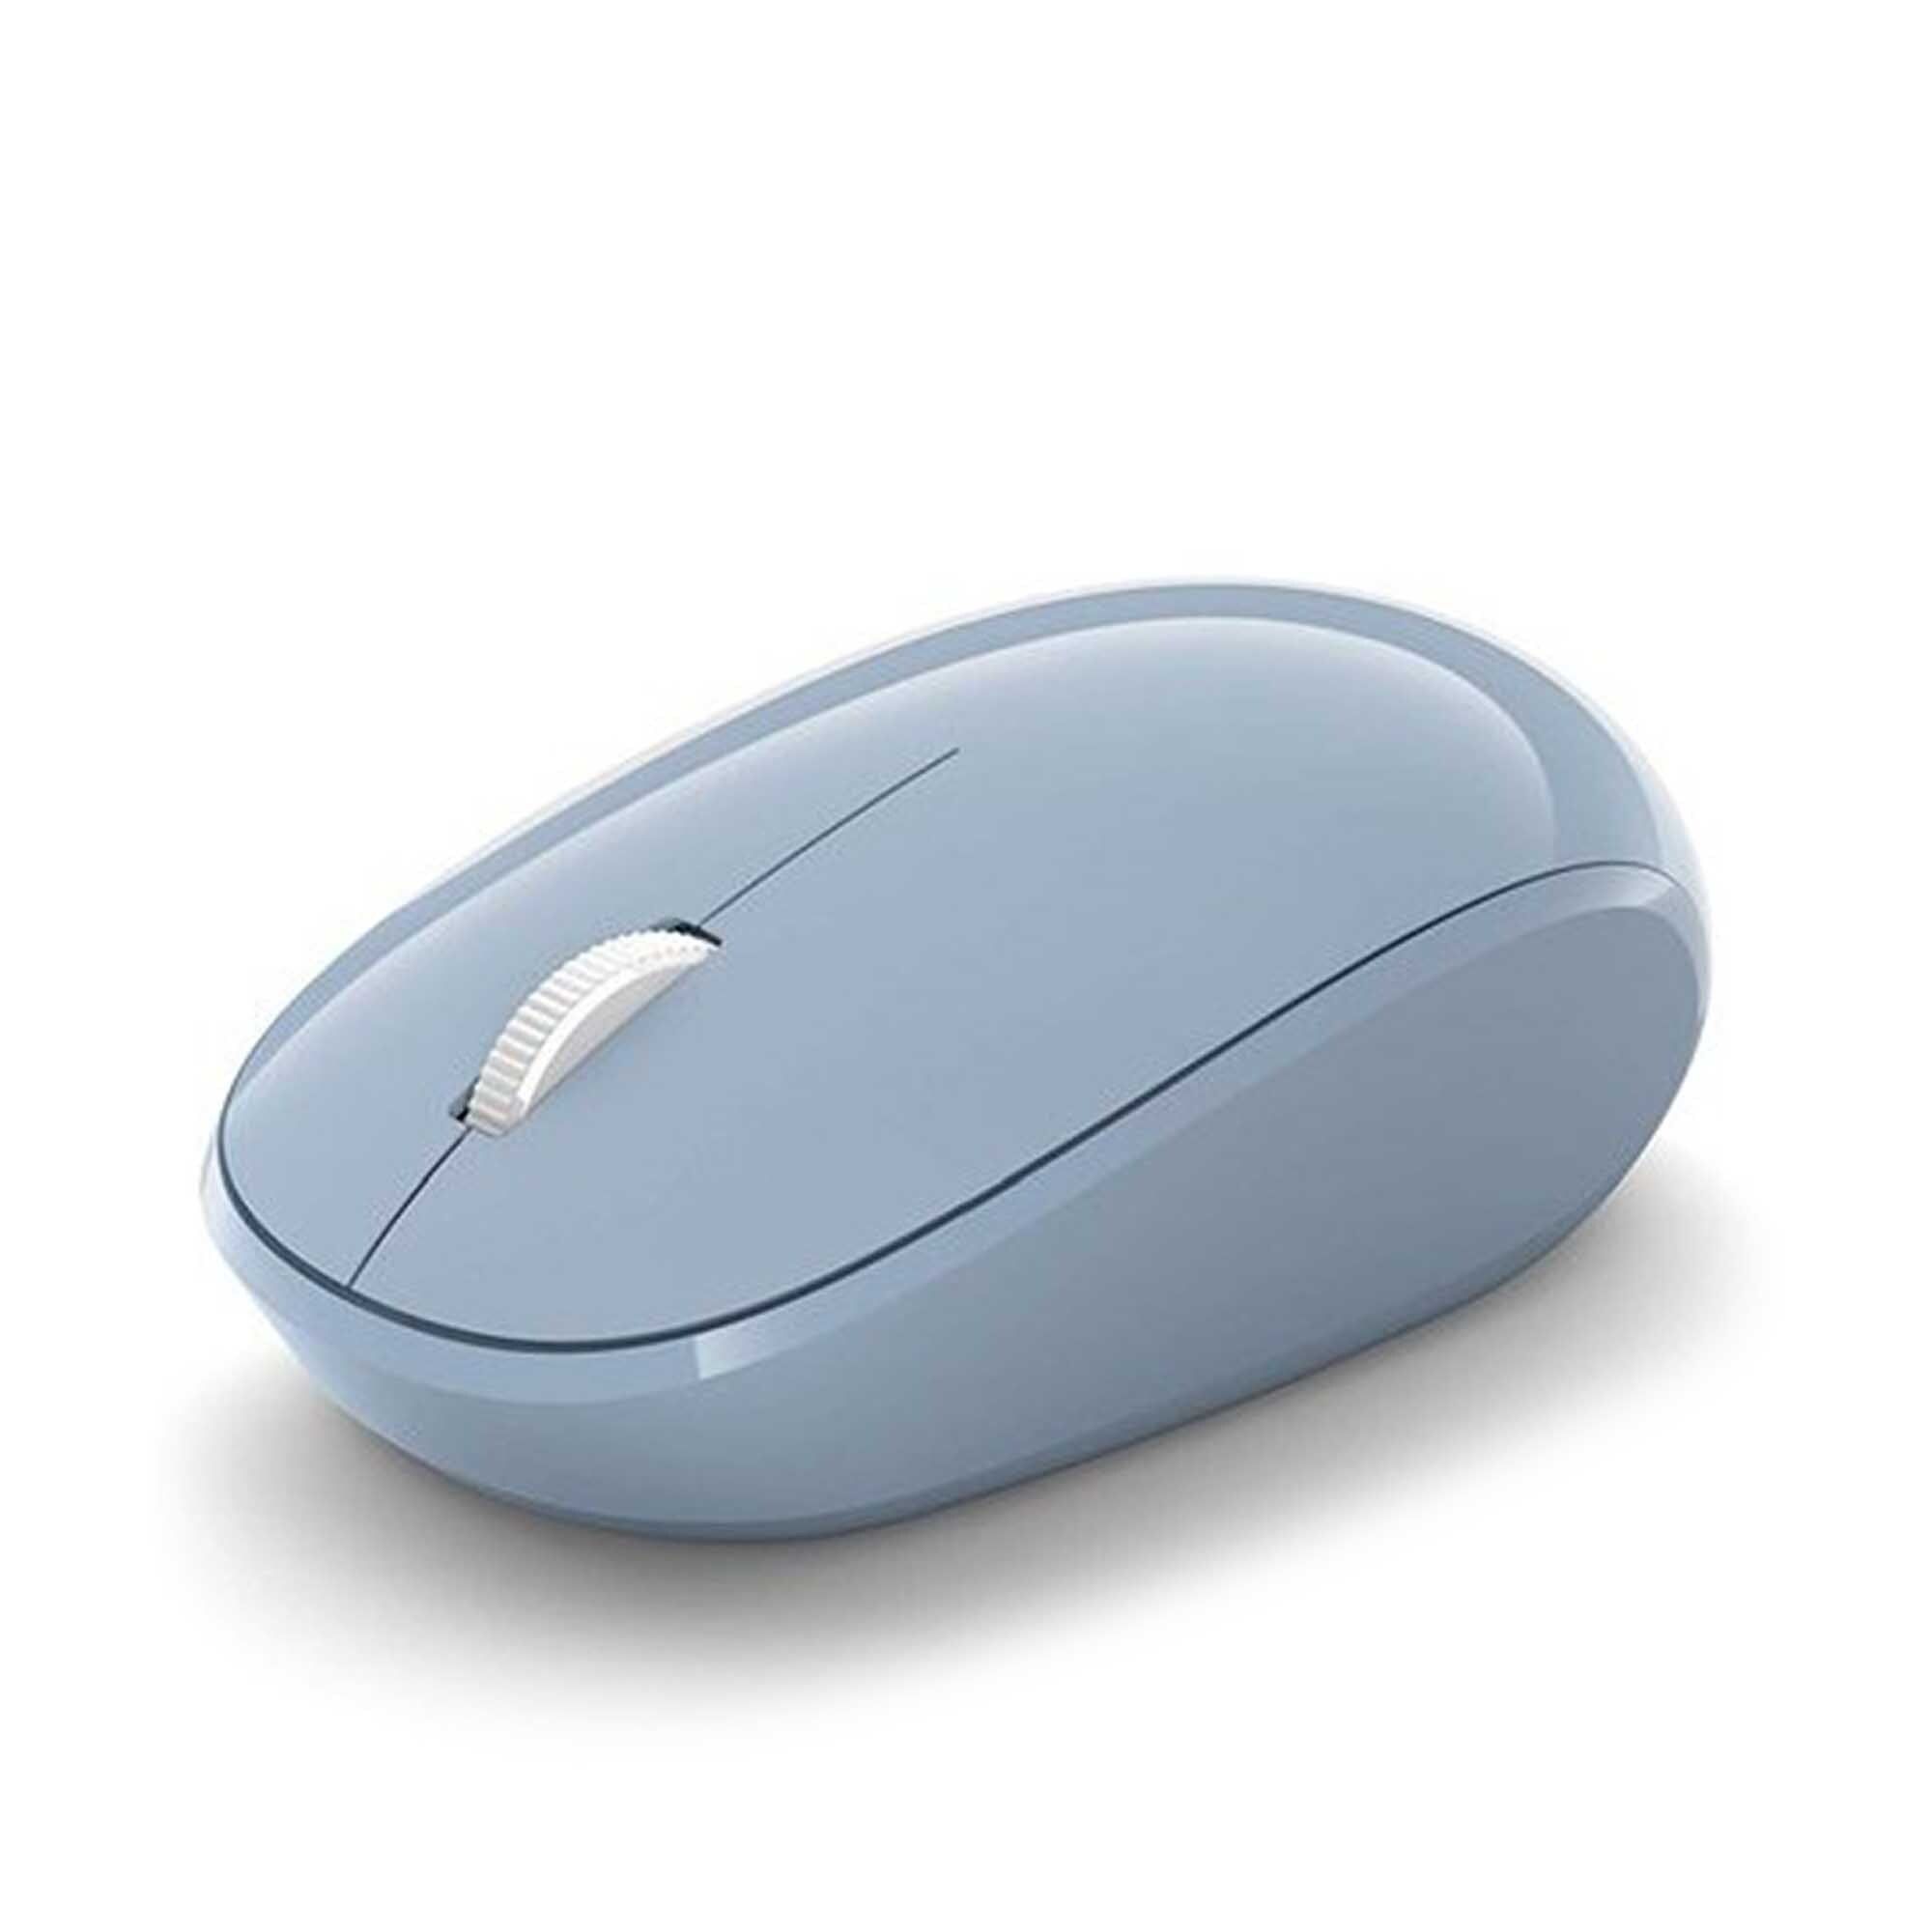 Liaoning Blue Mouse bluetooth wireless con 3 pulsanti